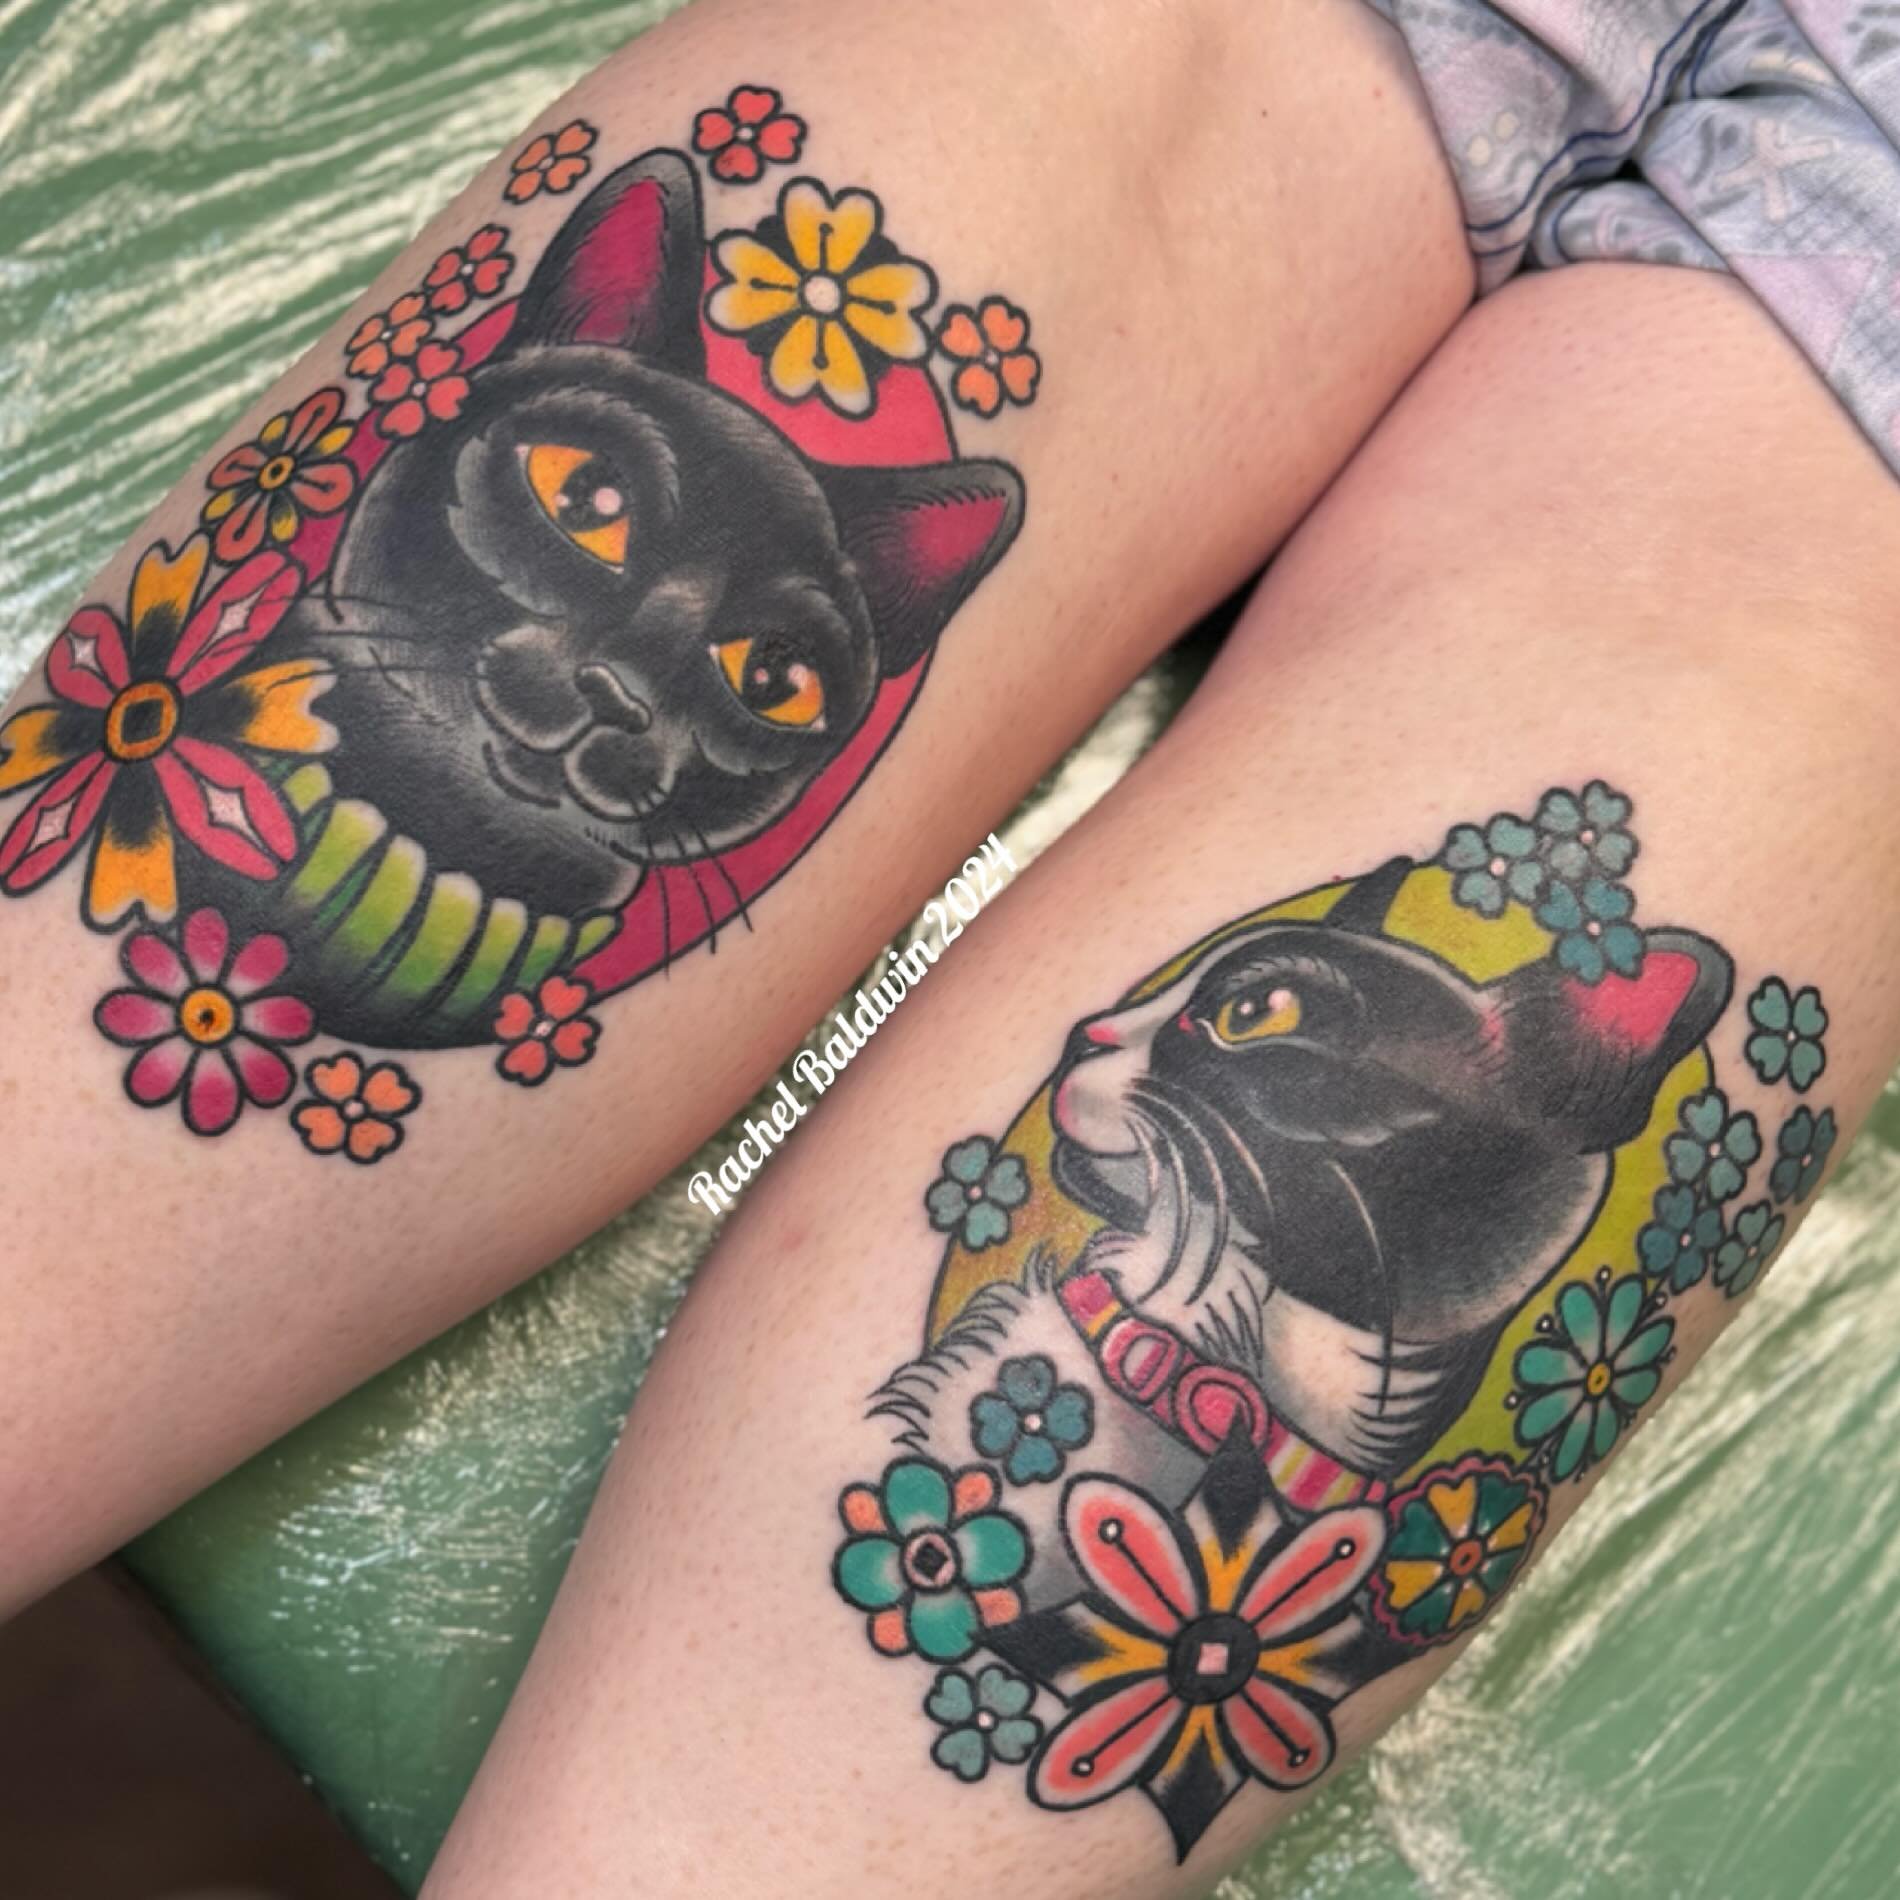 Cattoos by @rachelbaldwintattoo email Rachel to book in for May-July rachelbaldwintattoo@gmail.com #cattoo #catsofinstagram #cats